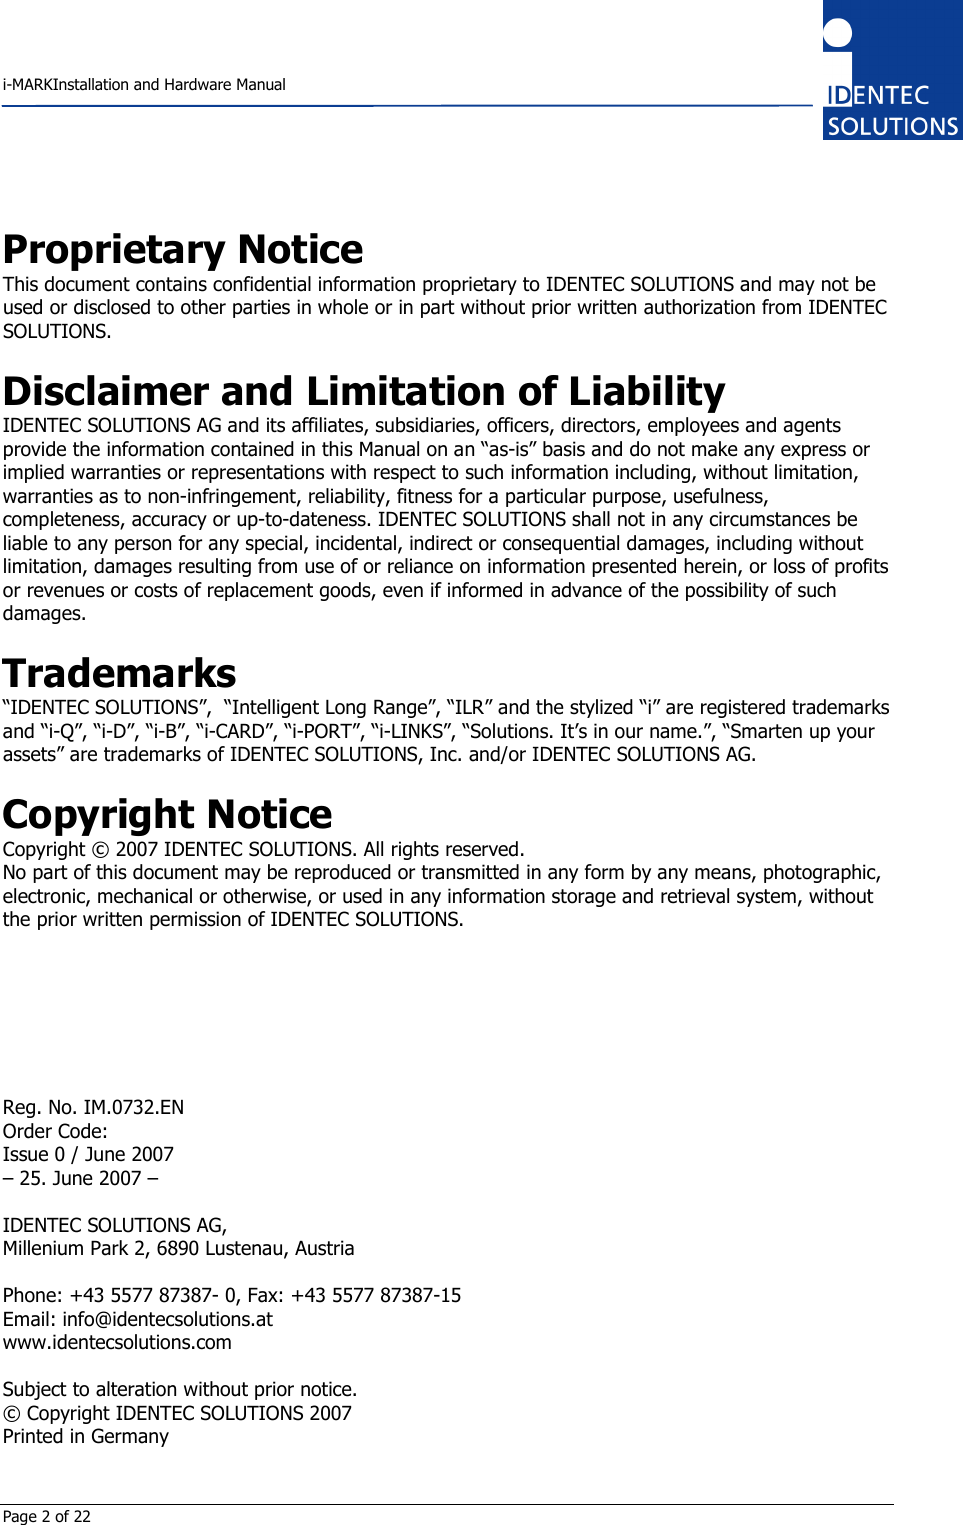    i-MARKInstallation and Hardware Manual  Page 2 of 22 Proprietary Notice This document contains confidential information proprietary to IDENTEC SOLUTIONS and may not be used or disclosed to other parties in whole or in part without prior written authorization from IDENTEC SOLUTIONS.  Disclaimer and Limitation of Liability IDENTEC SOLUTIONS AG and its affiliates, subsidiaries, officers, directors, employees and agents provide the information contained in this Manual on an “as-is” basis and do not make any express or implied warranties or representations with respect to such information including, without limitation, warranties as to non-infringement, reliability, fitness for a particular purpose, usefulness, completeness, accuracy or up-to-dateness. IDENTEC SOLUTIONS shall not in any circumstances be liable to any person for any special, incidental, indirect or consequential damages, including without limitation, damages resulting from use of or reliance on information presented herein, or loss of profits or revenues or costs of replacement goods, even if informed in advance of the possibility of such damages.  Trademarks “IDENTEC SOLUTIONS”,  “Intelligent Long Range”, “ILR” and the stylized “i” are registered trademarks and “i-Q”, “i-D”, “i-B”, “i-CARD”, “i-PORT”, “i-LINKS”, “Solutions. It’s in our name.”, “Smarten up your assets” are trademarks of IDENTEC SOLUTIONS, Inc. and/or IDENTEC SOLUTIONS AG.  Copyright Notice Copyright © 2007 IDENTEC SOLUTIONS. All rights reserved. No part of this document may be reproduced or transmitted in any form by any means, photographic, electronic, mechanical or otherwise, or used in any information storage and retrieval system, without the prior written permission of IDENTEC SOLUTIONS.        Reg. No. IM.0732.EN Order Code: Issue 0 / June 2007 – 25. June 2007 –  IDENTEC SOLUTIONS AG,  Millenium Park 2, 6890 Lustenau, Austria  Phone: +43 5577 87387- 0, Fax: +43 5577 87387-15 Email: info@identecsolutions.at www.identecsolutions.com  Subject to alteration without prior notice. © Copyright IDENTEC SOLUTIONS 2007 Printed in Germany  